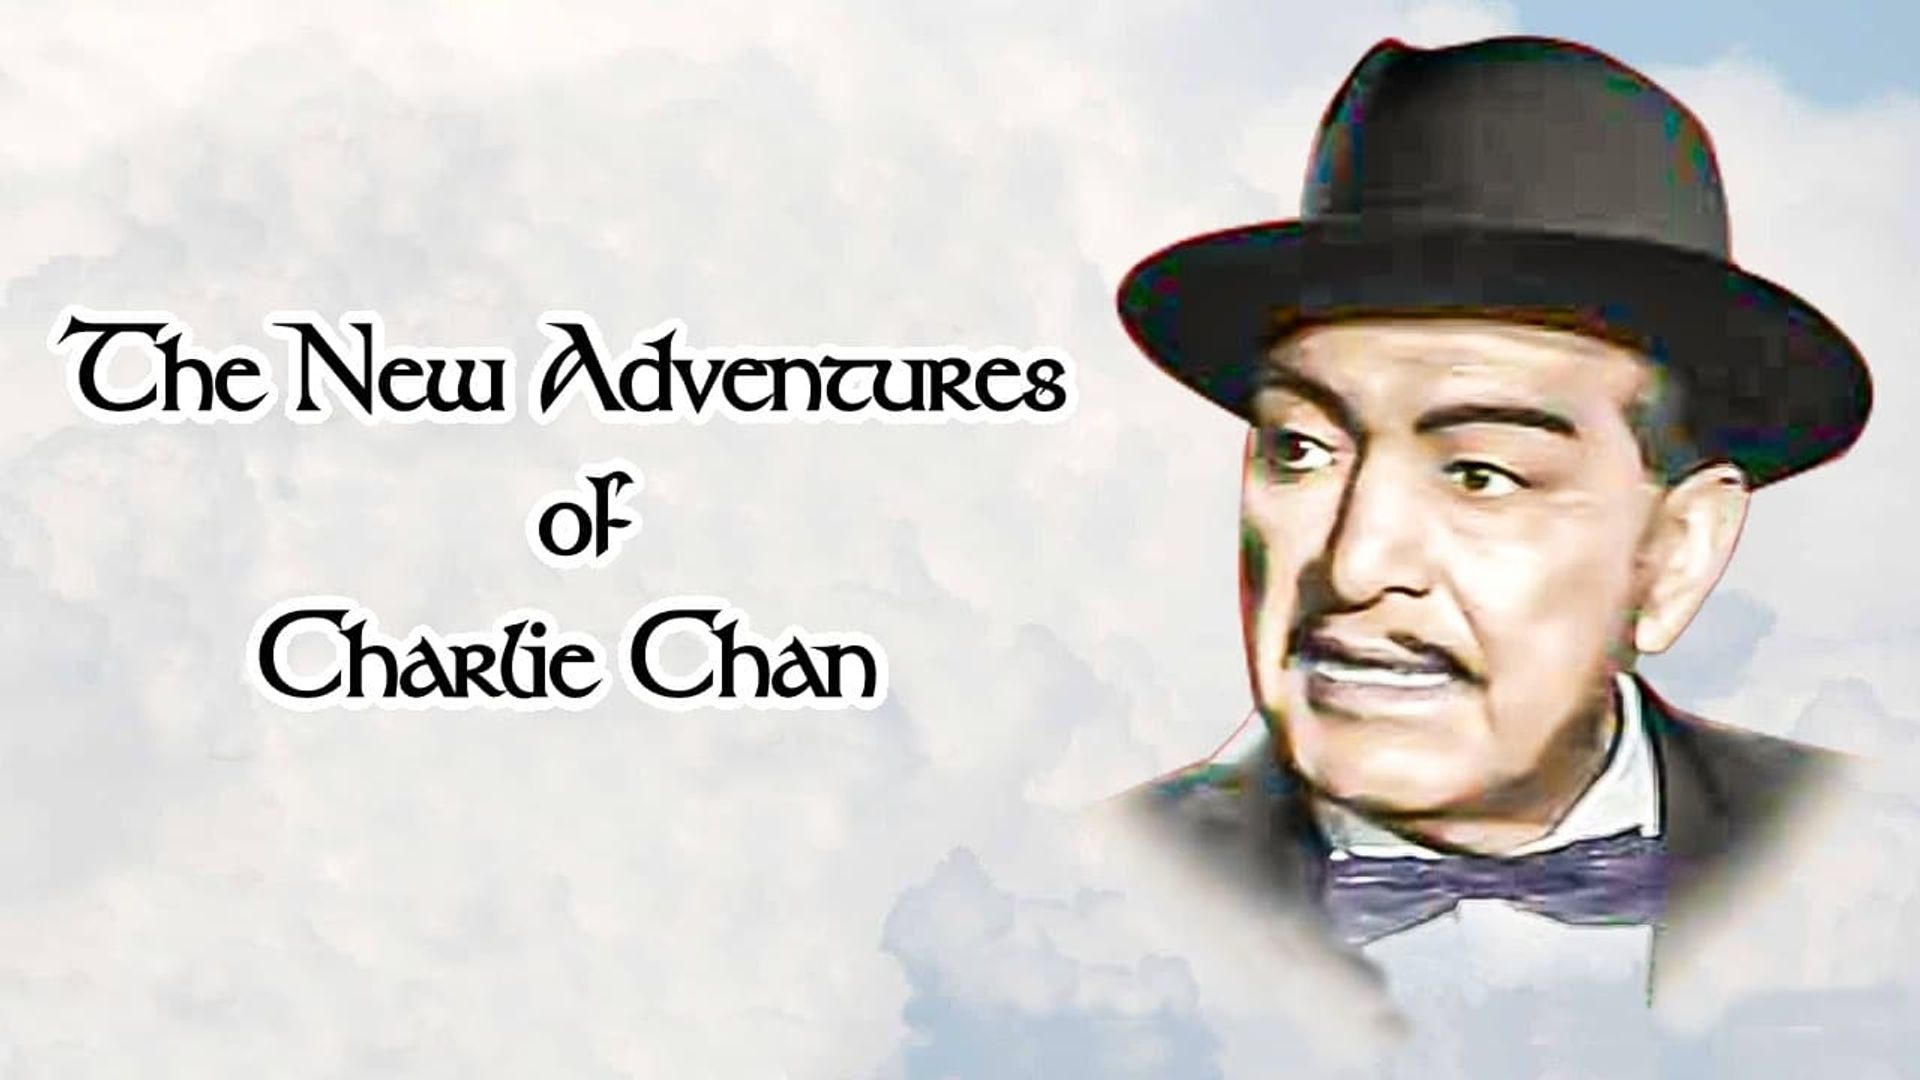 The New Adventures of Charlie Chan background